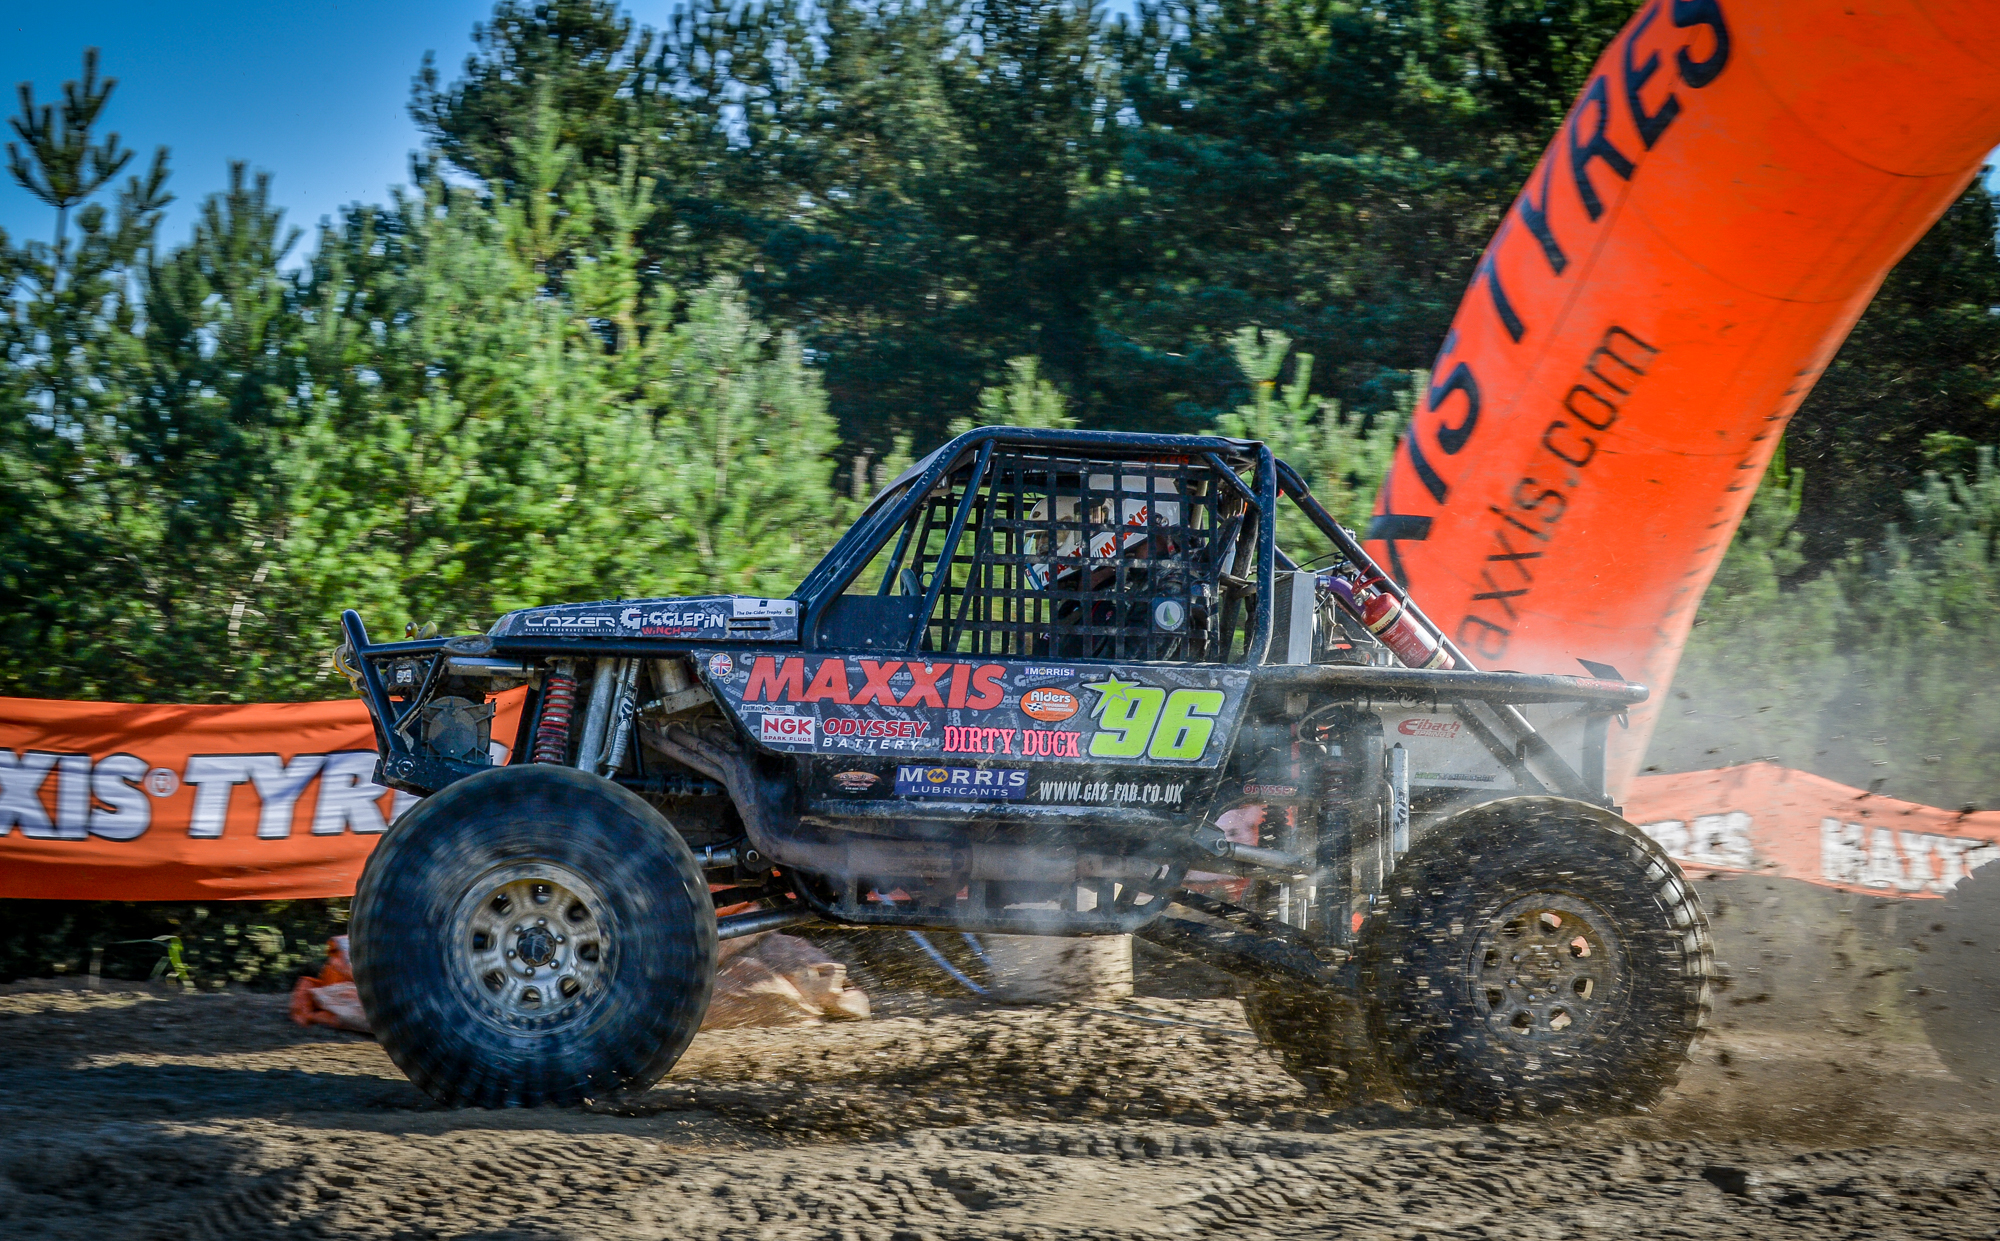 Maxxis-sponsored Gigglepin Racing takes King of Britain title